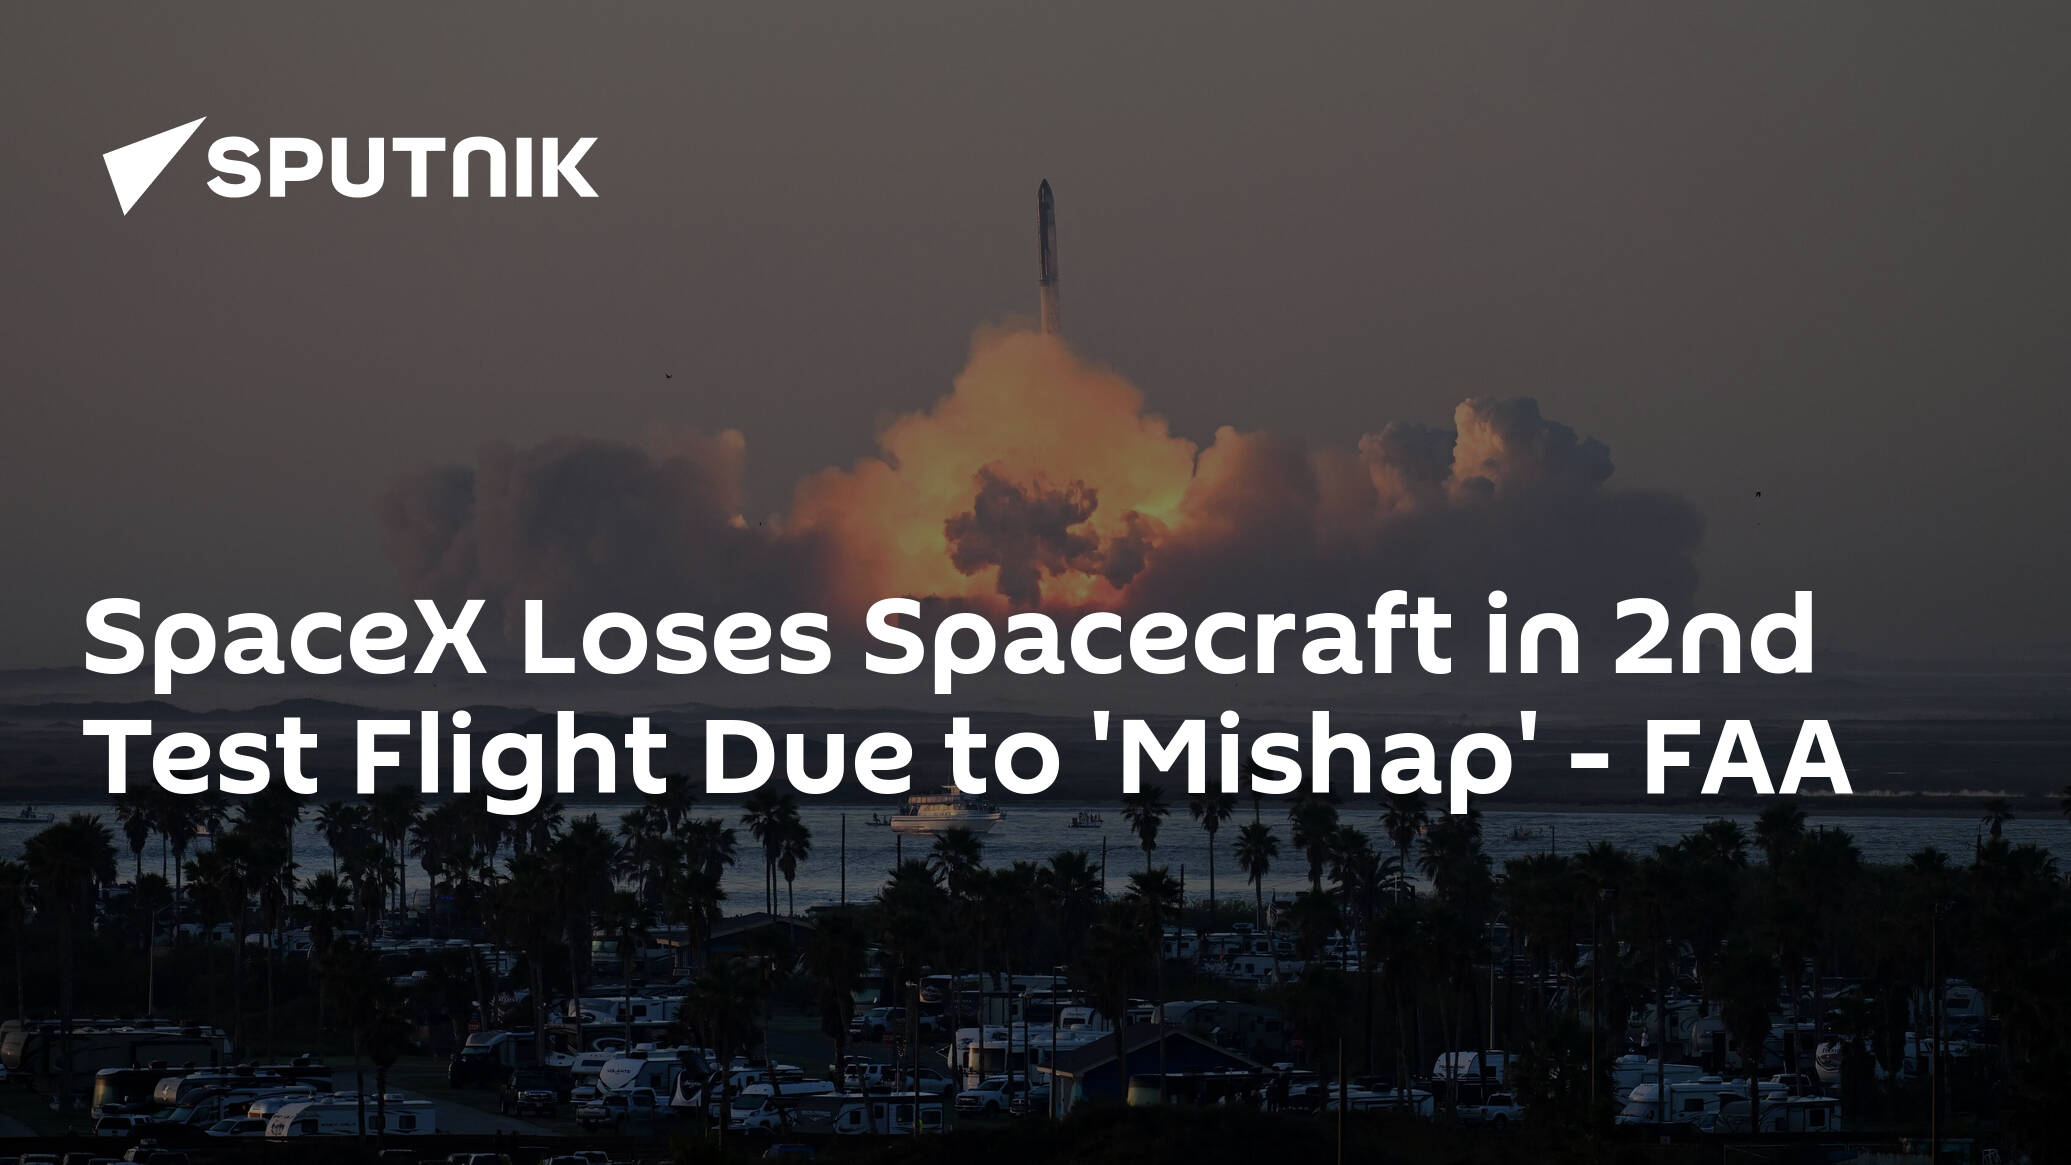 'Mishap' During 2nd Test Flight of SpaceX's Starship Resulted in Loss of Spacecraft – FAA